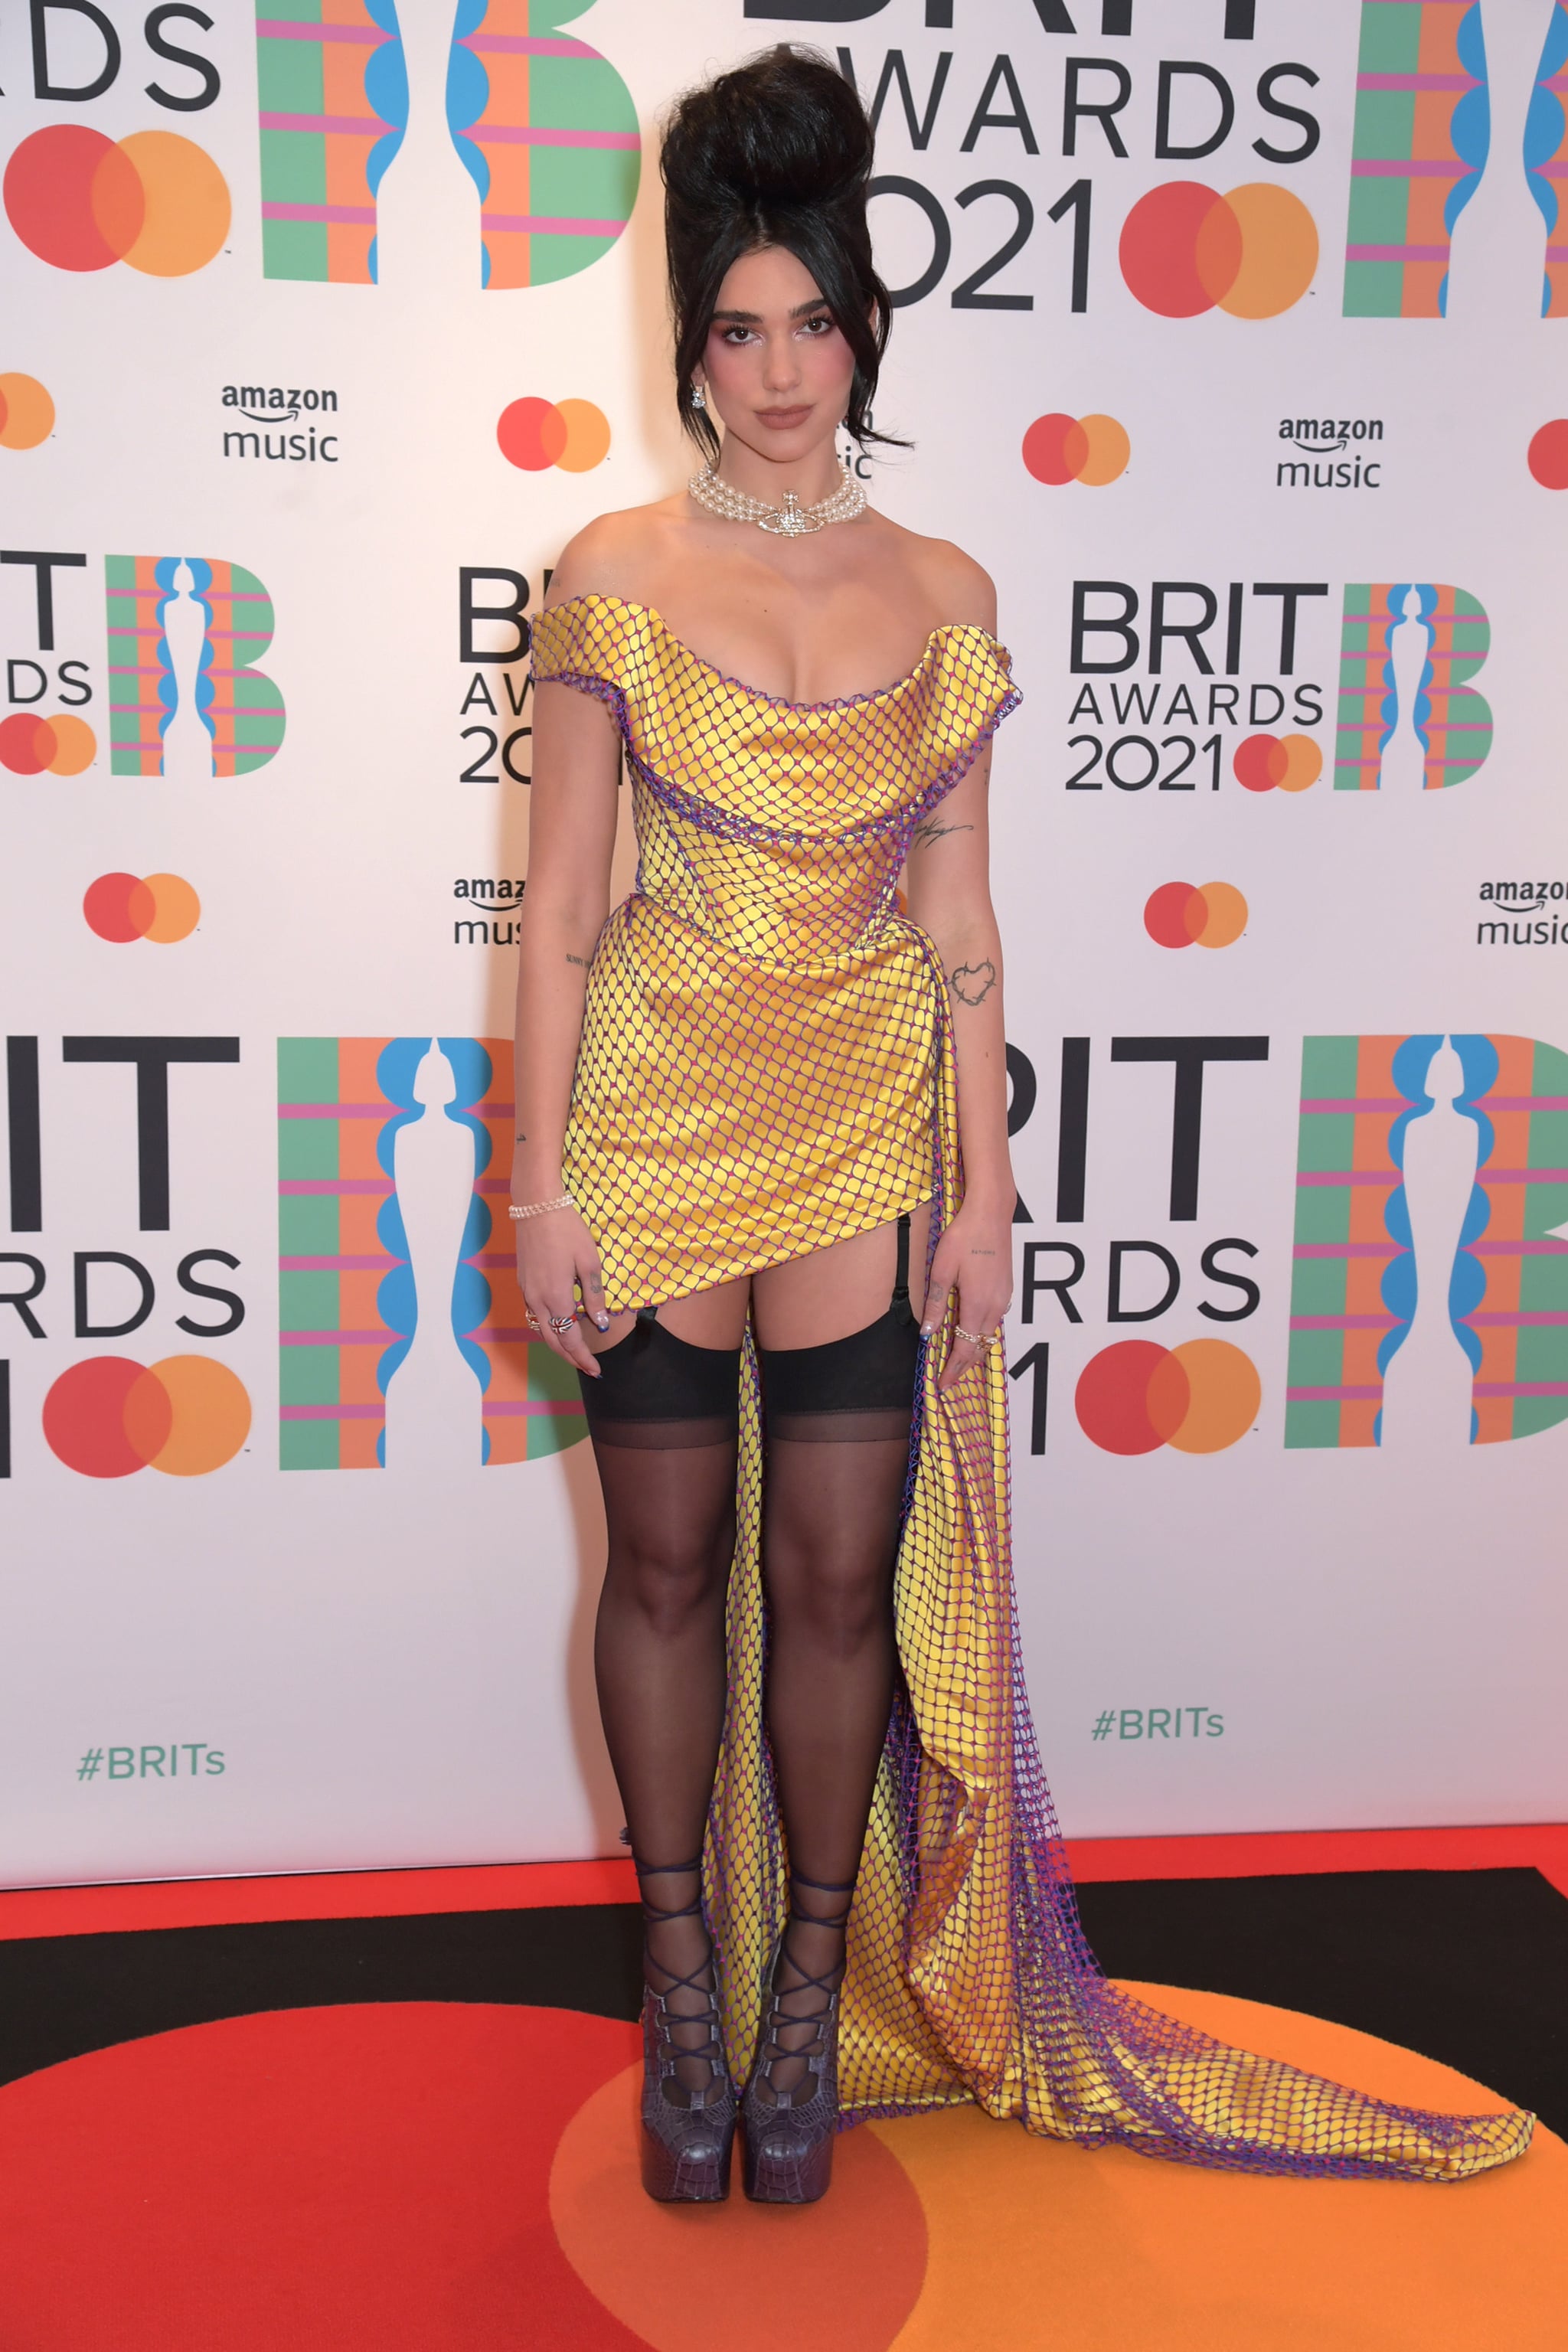 The best looks served at the 2021 Brit Awards